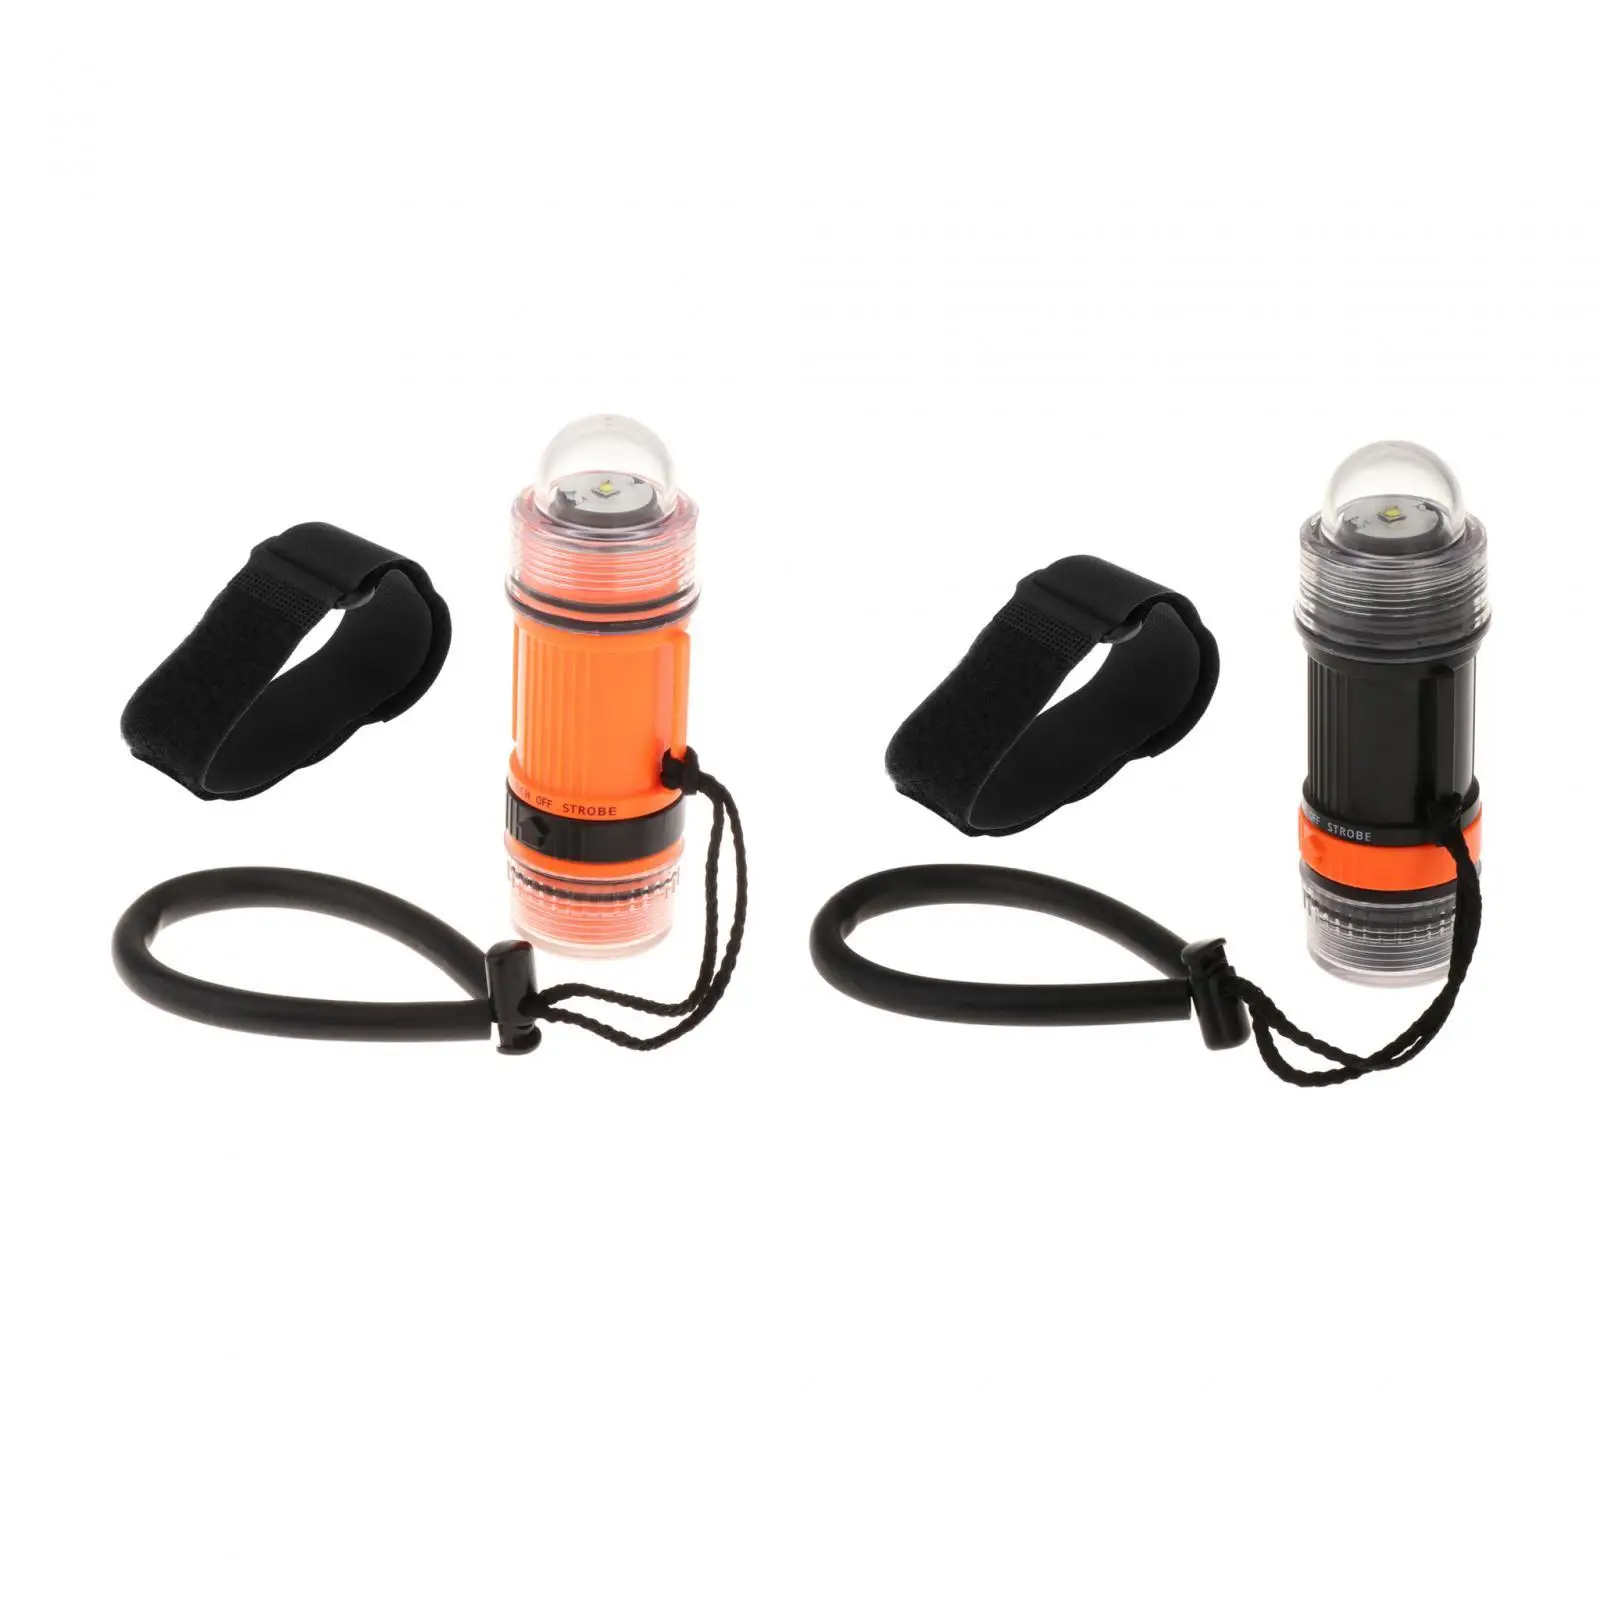 Diving Flashlight Bright Handheld Snorkeling 2 in 1 Portable Scuba Diving Strobe for Hiking Under Water Outdoor Deep Sea Caving